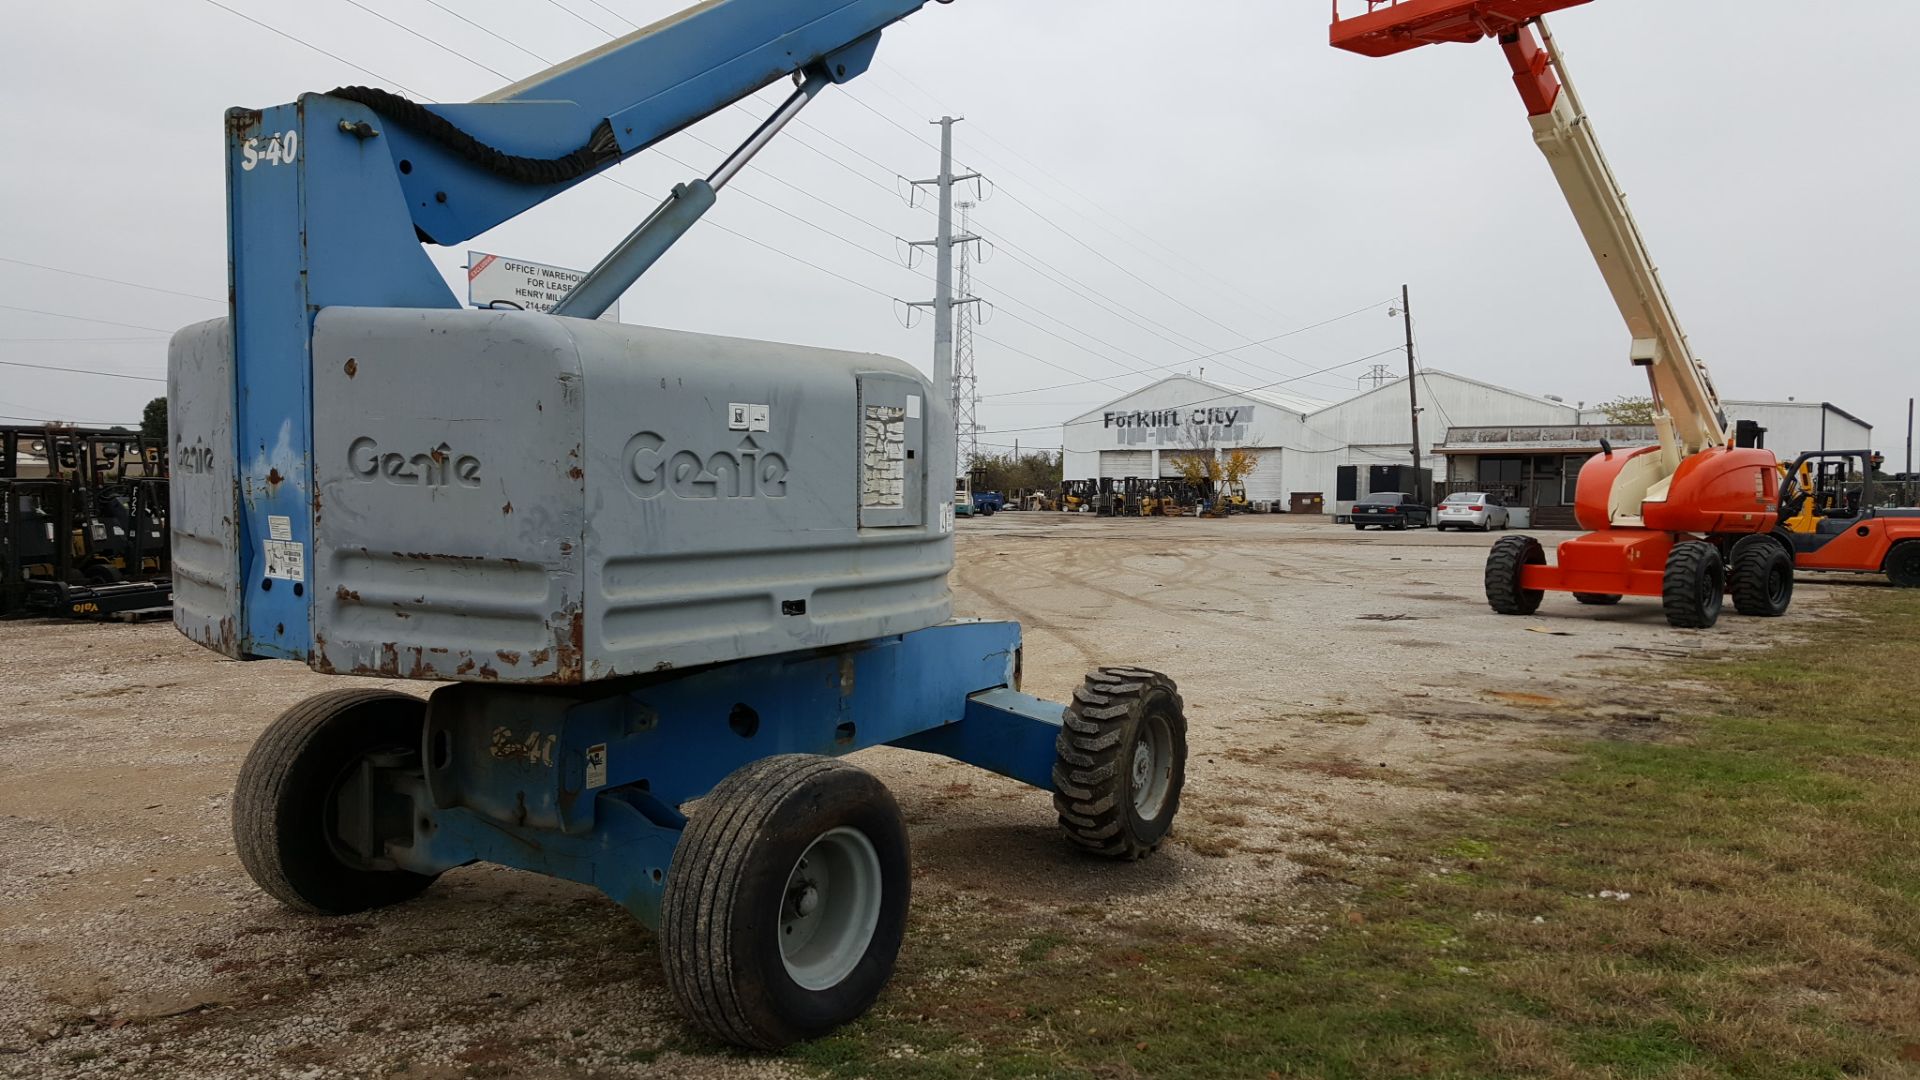 TELESCOPING BOOM MANLIFT, GENIE MDL. S40, new 1998, 40' 2-section boom lift, Ford 4 cyl. LPG engine, - Image 4 of 6